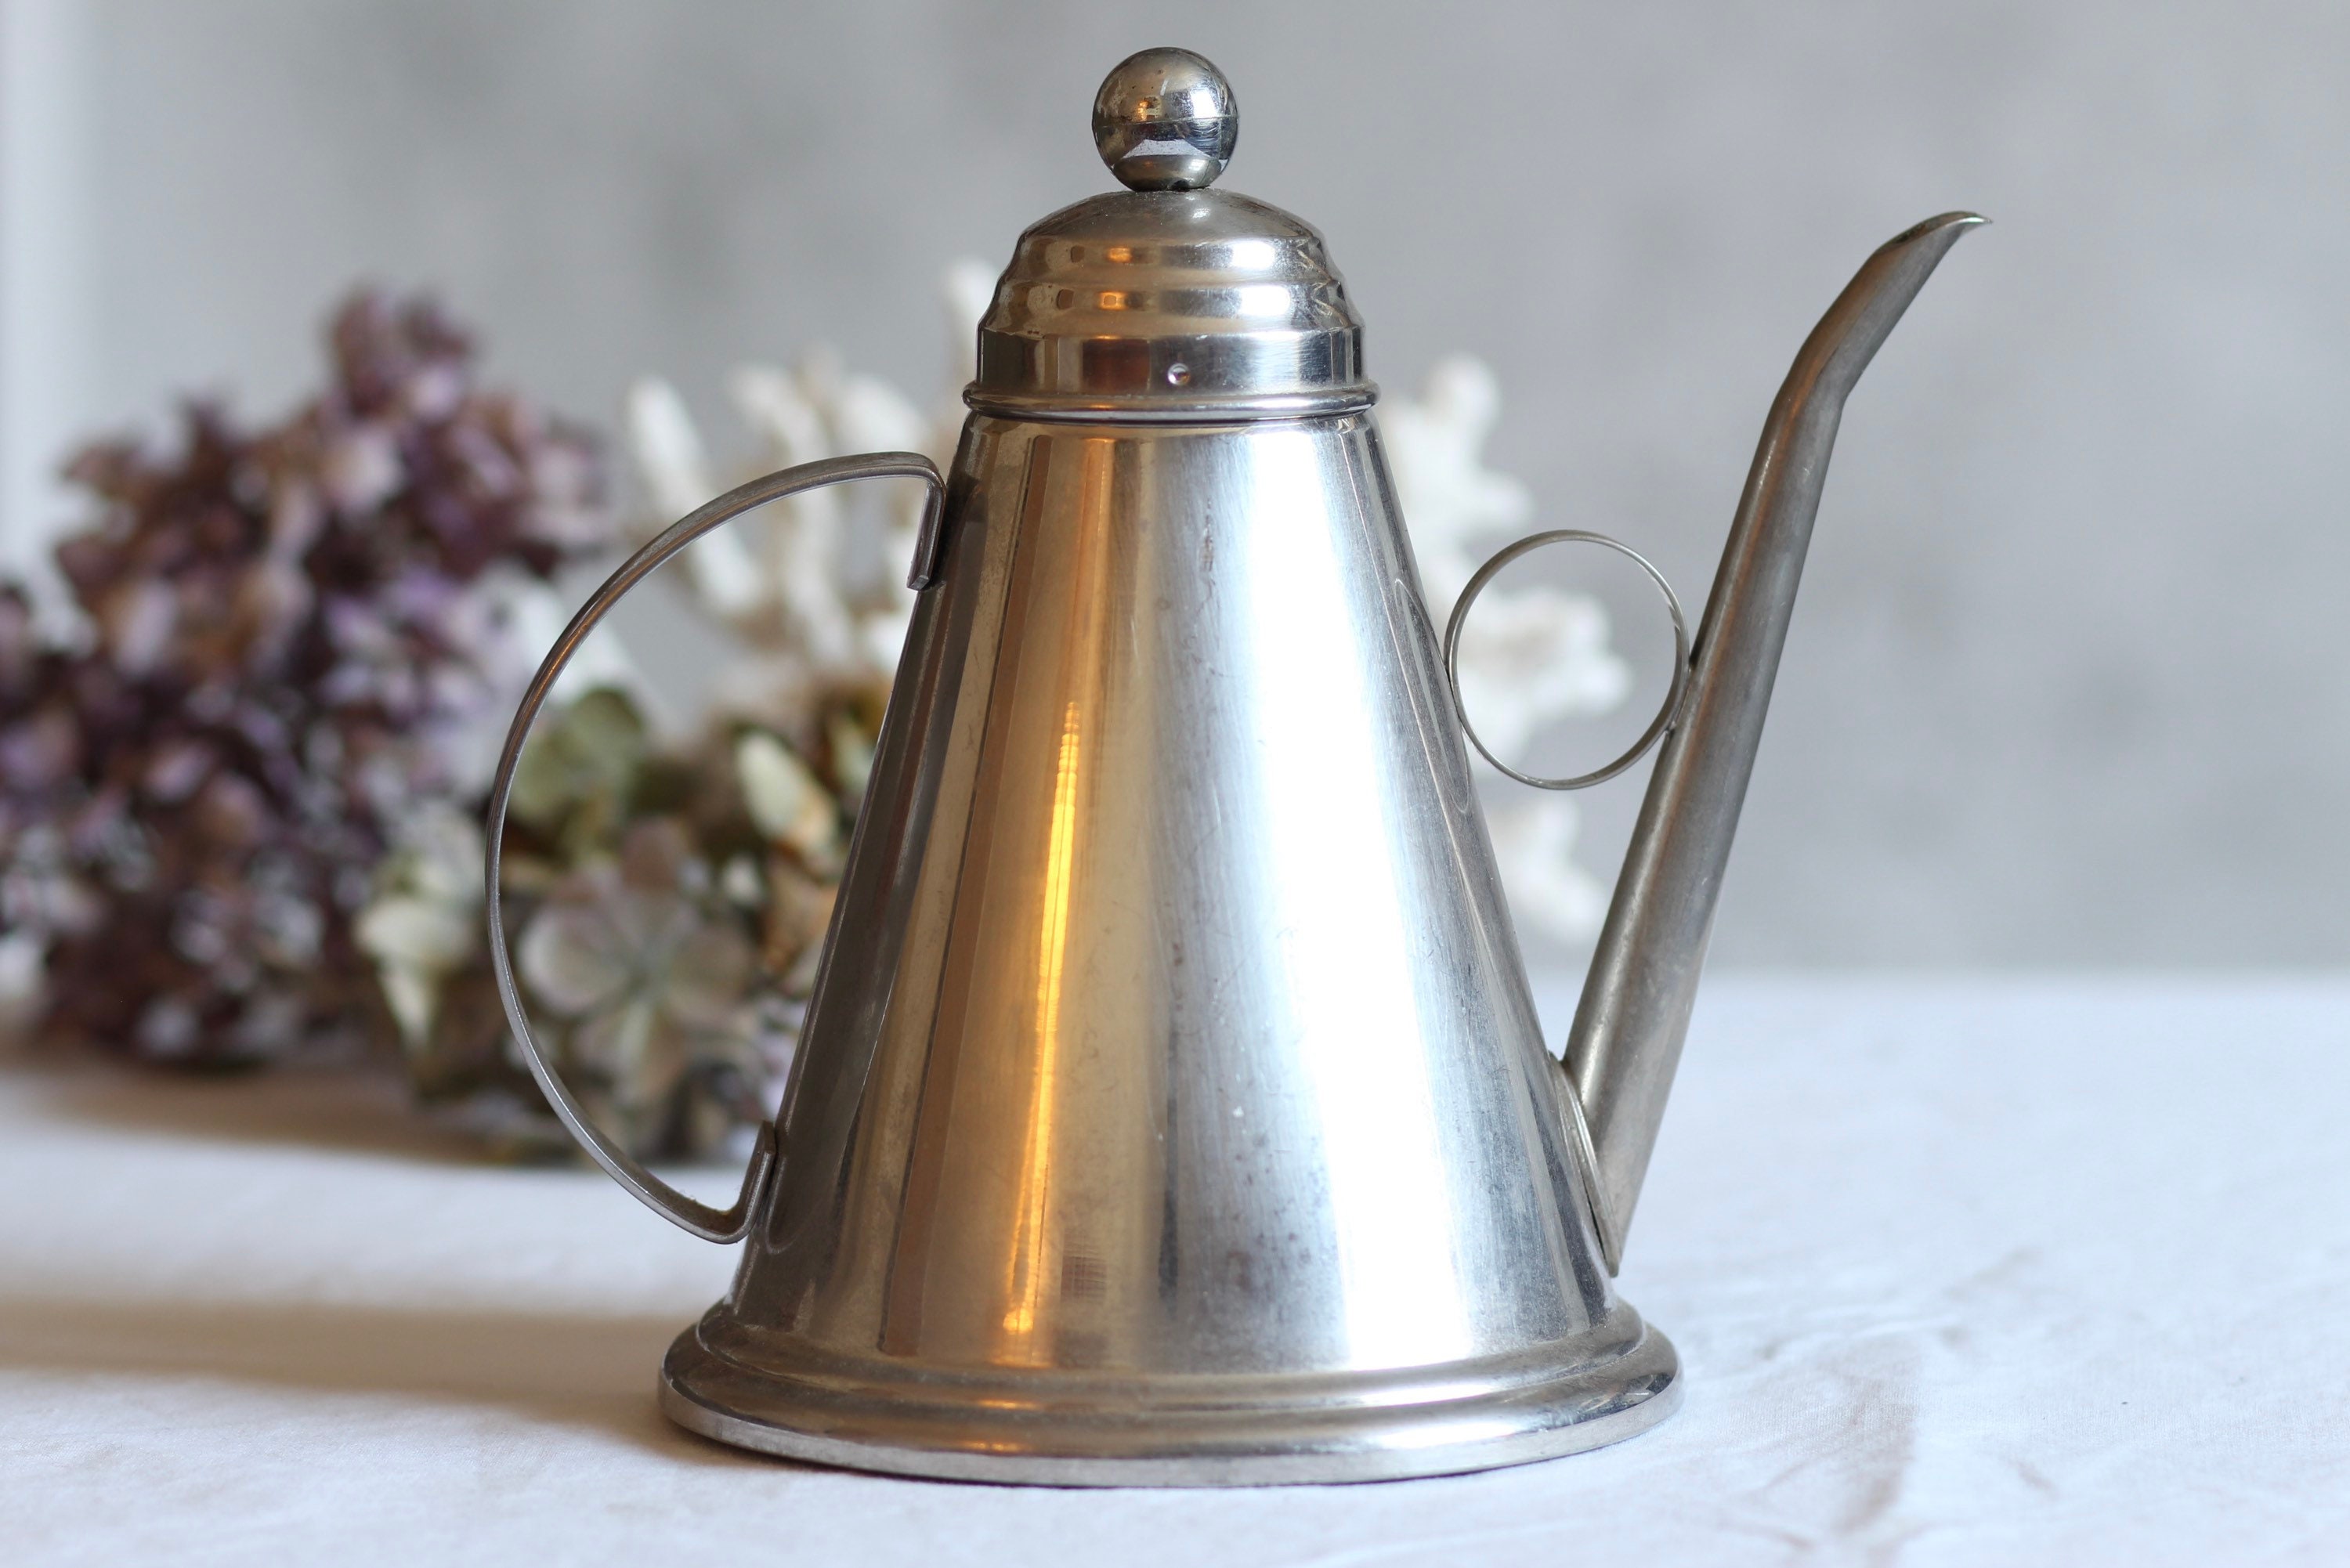 Nevvacold Vintage / Retro Insulated Teapot